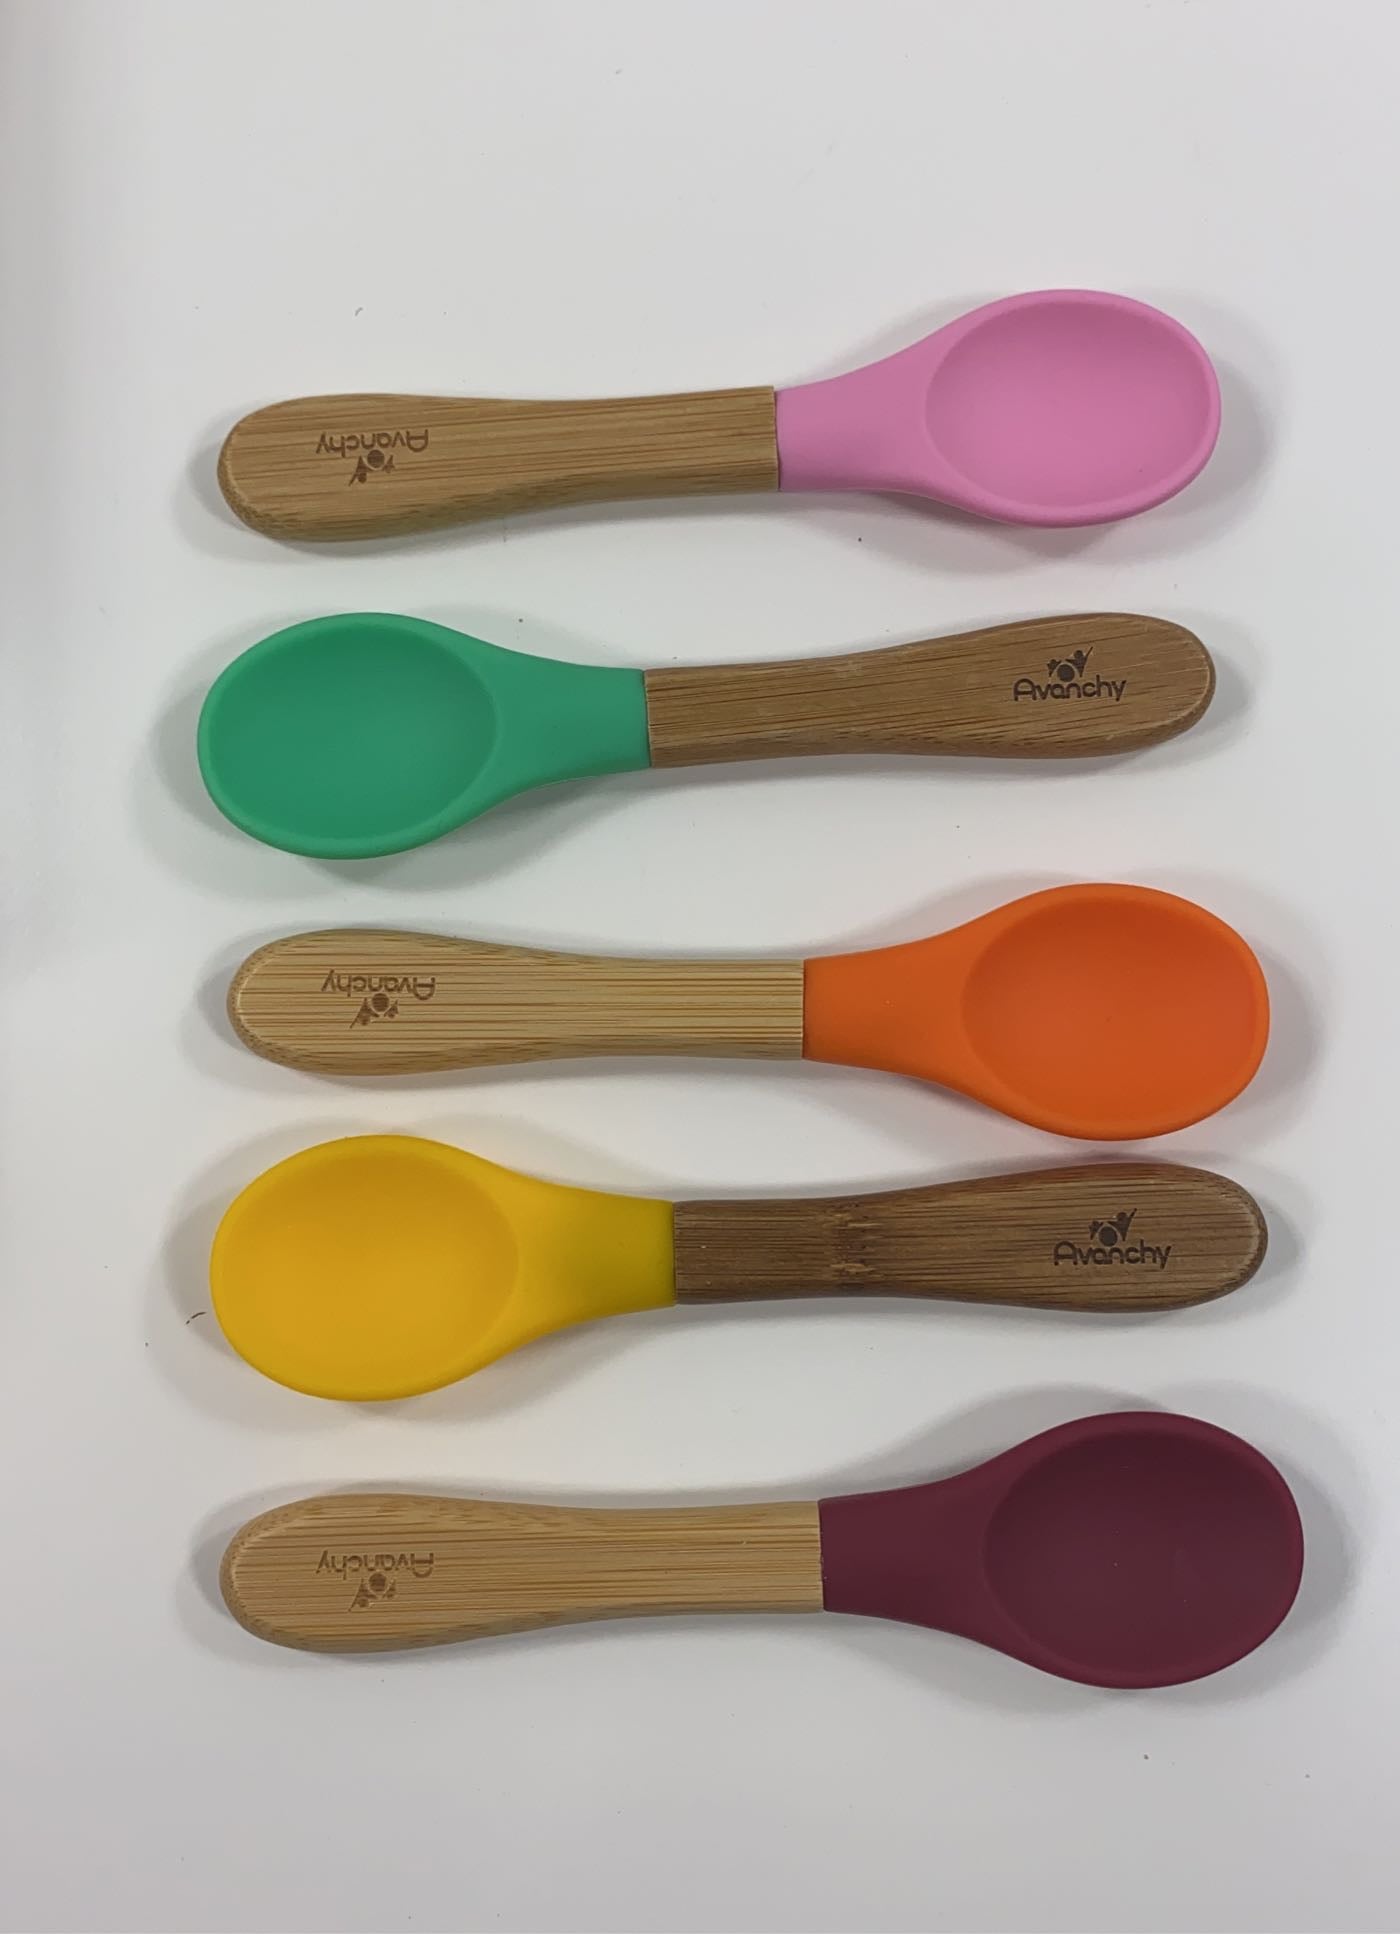 https://www.goodbuygear.shop/wp-content/uploads/1689/85/find-the-most-amazing-deals-at-avanchy-bamboo-baby-spoons-5-pack-bl-9993700_0.jpg